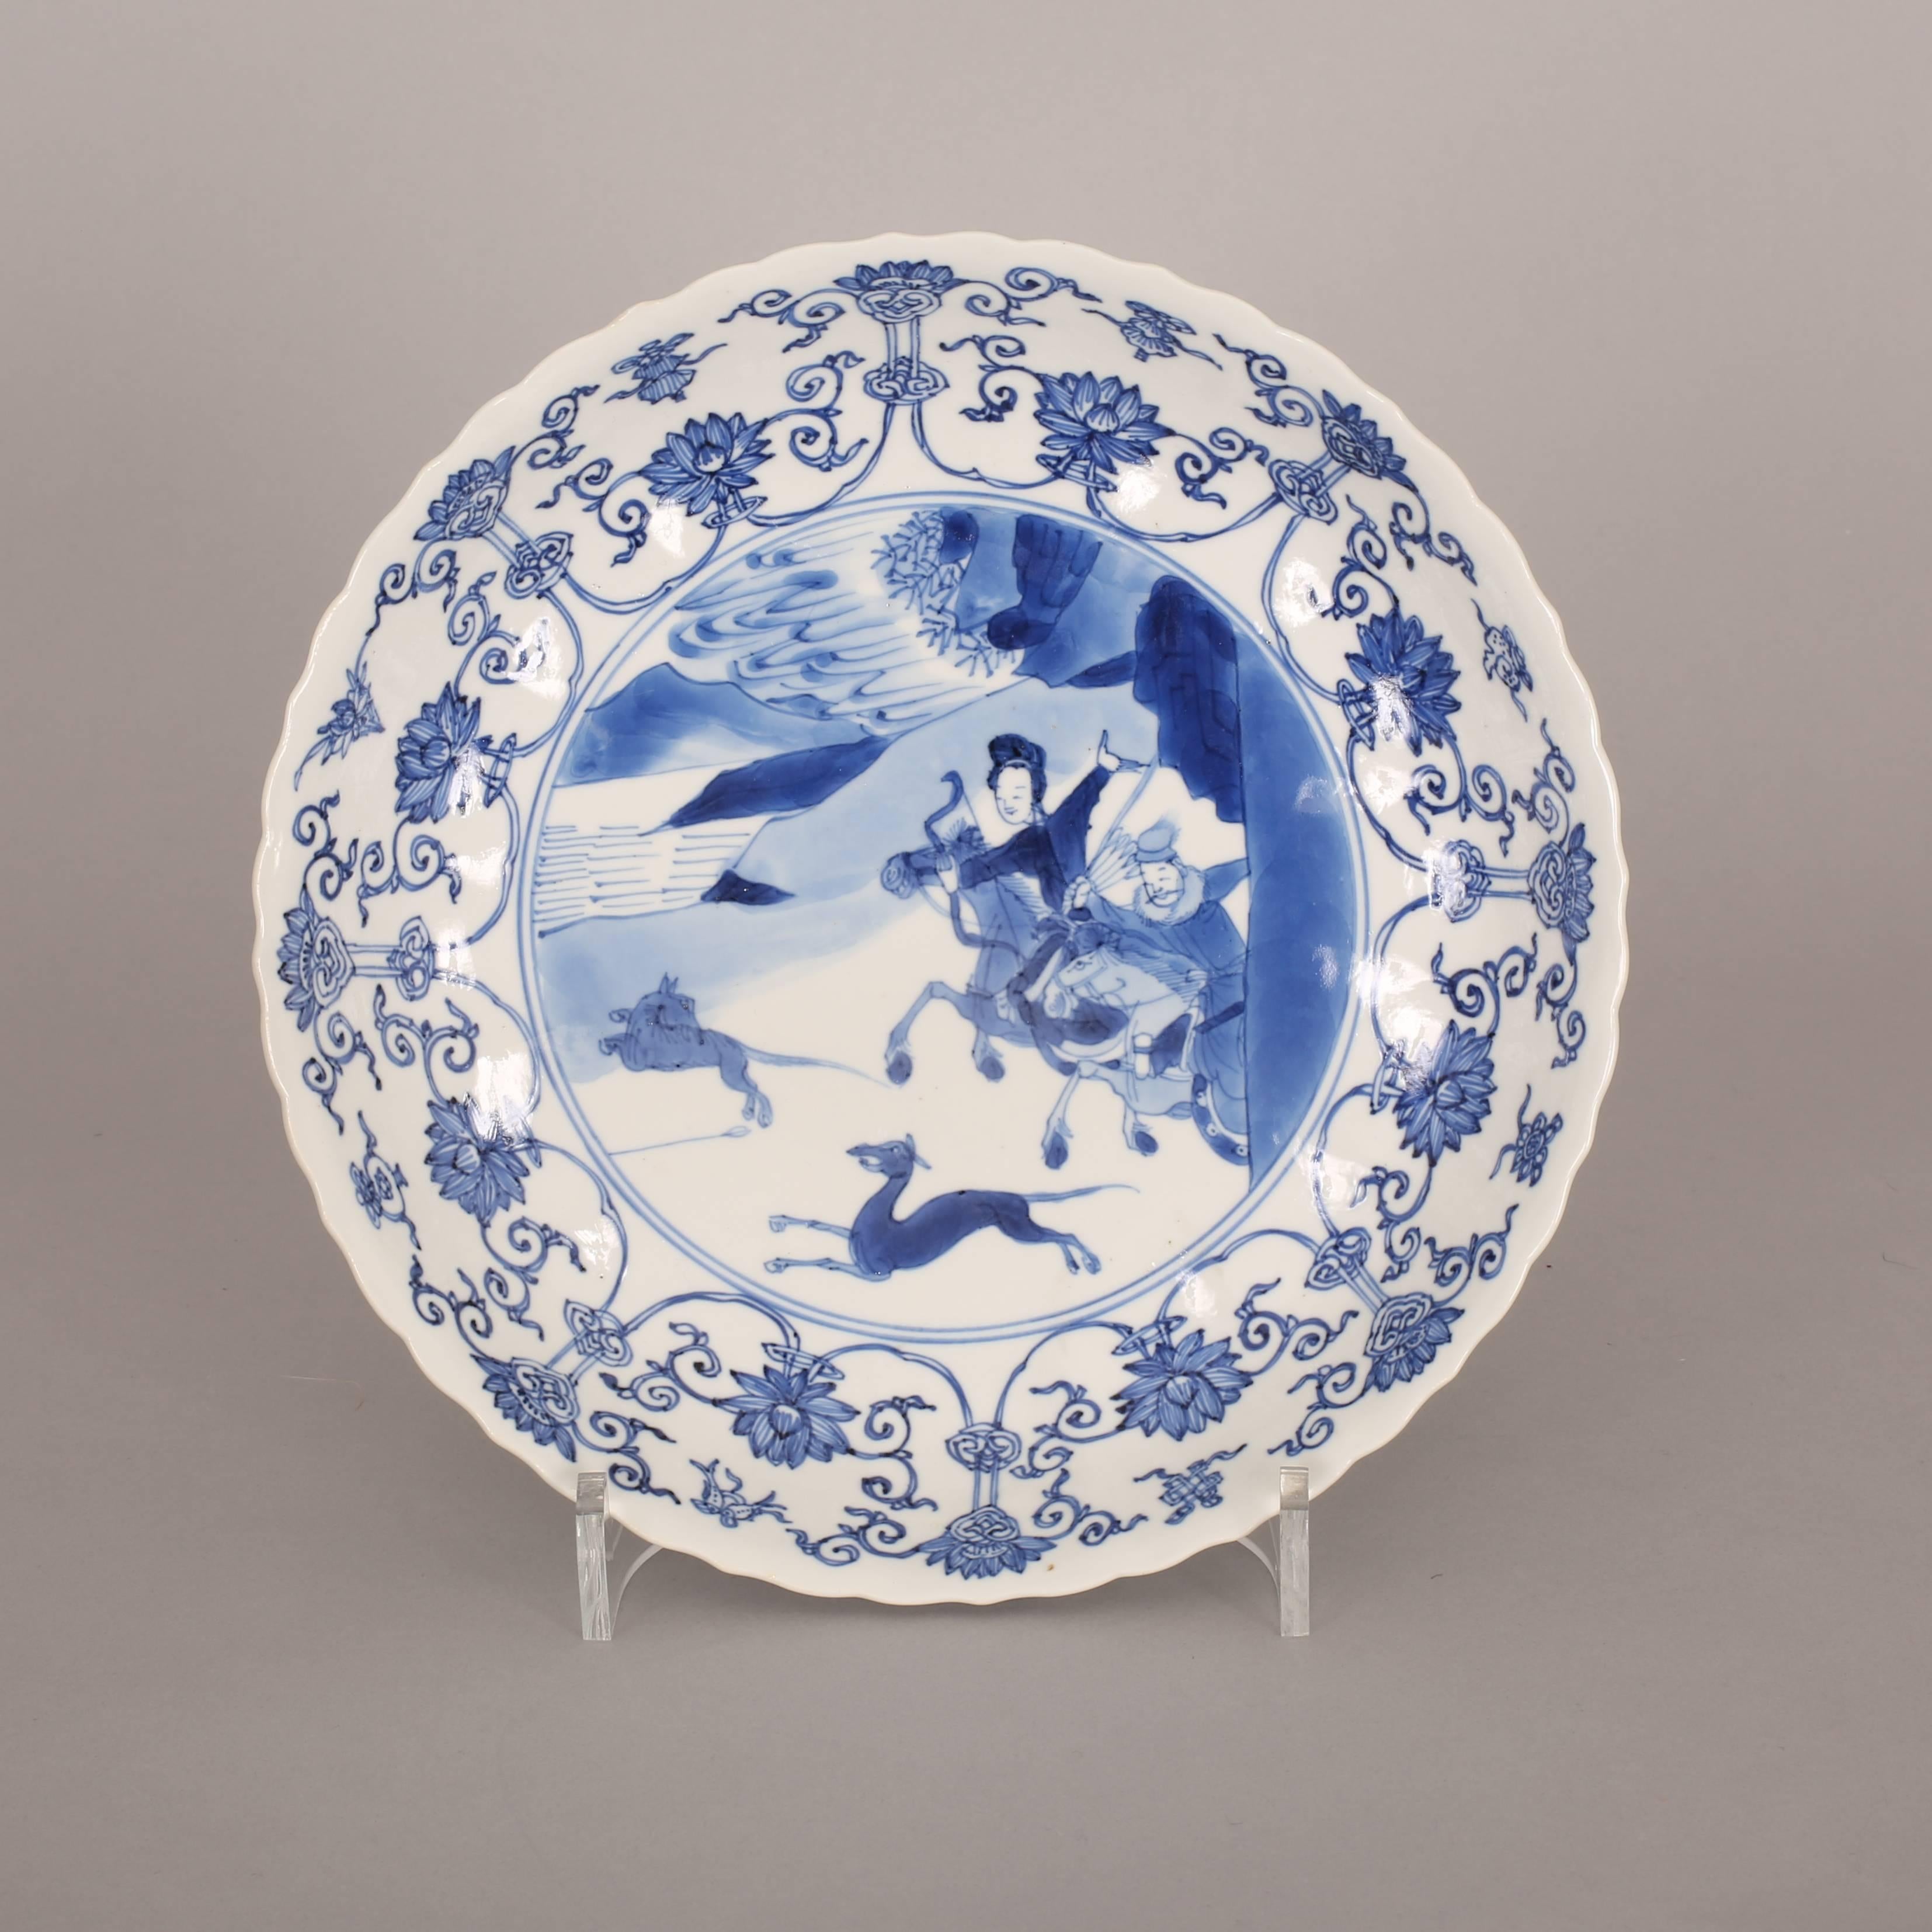 A Chinese porcelain blue and white saucer dish with foliate rim, painted with a central medallion of a hunting scene with a lady and a man both on horses with bows and arrows and two dogs in front, all in a mountainous river landscape scene, all